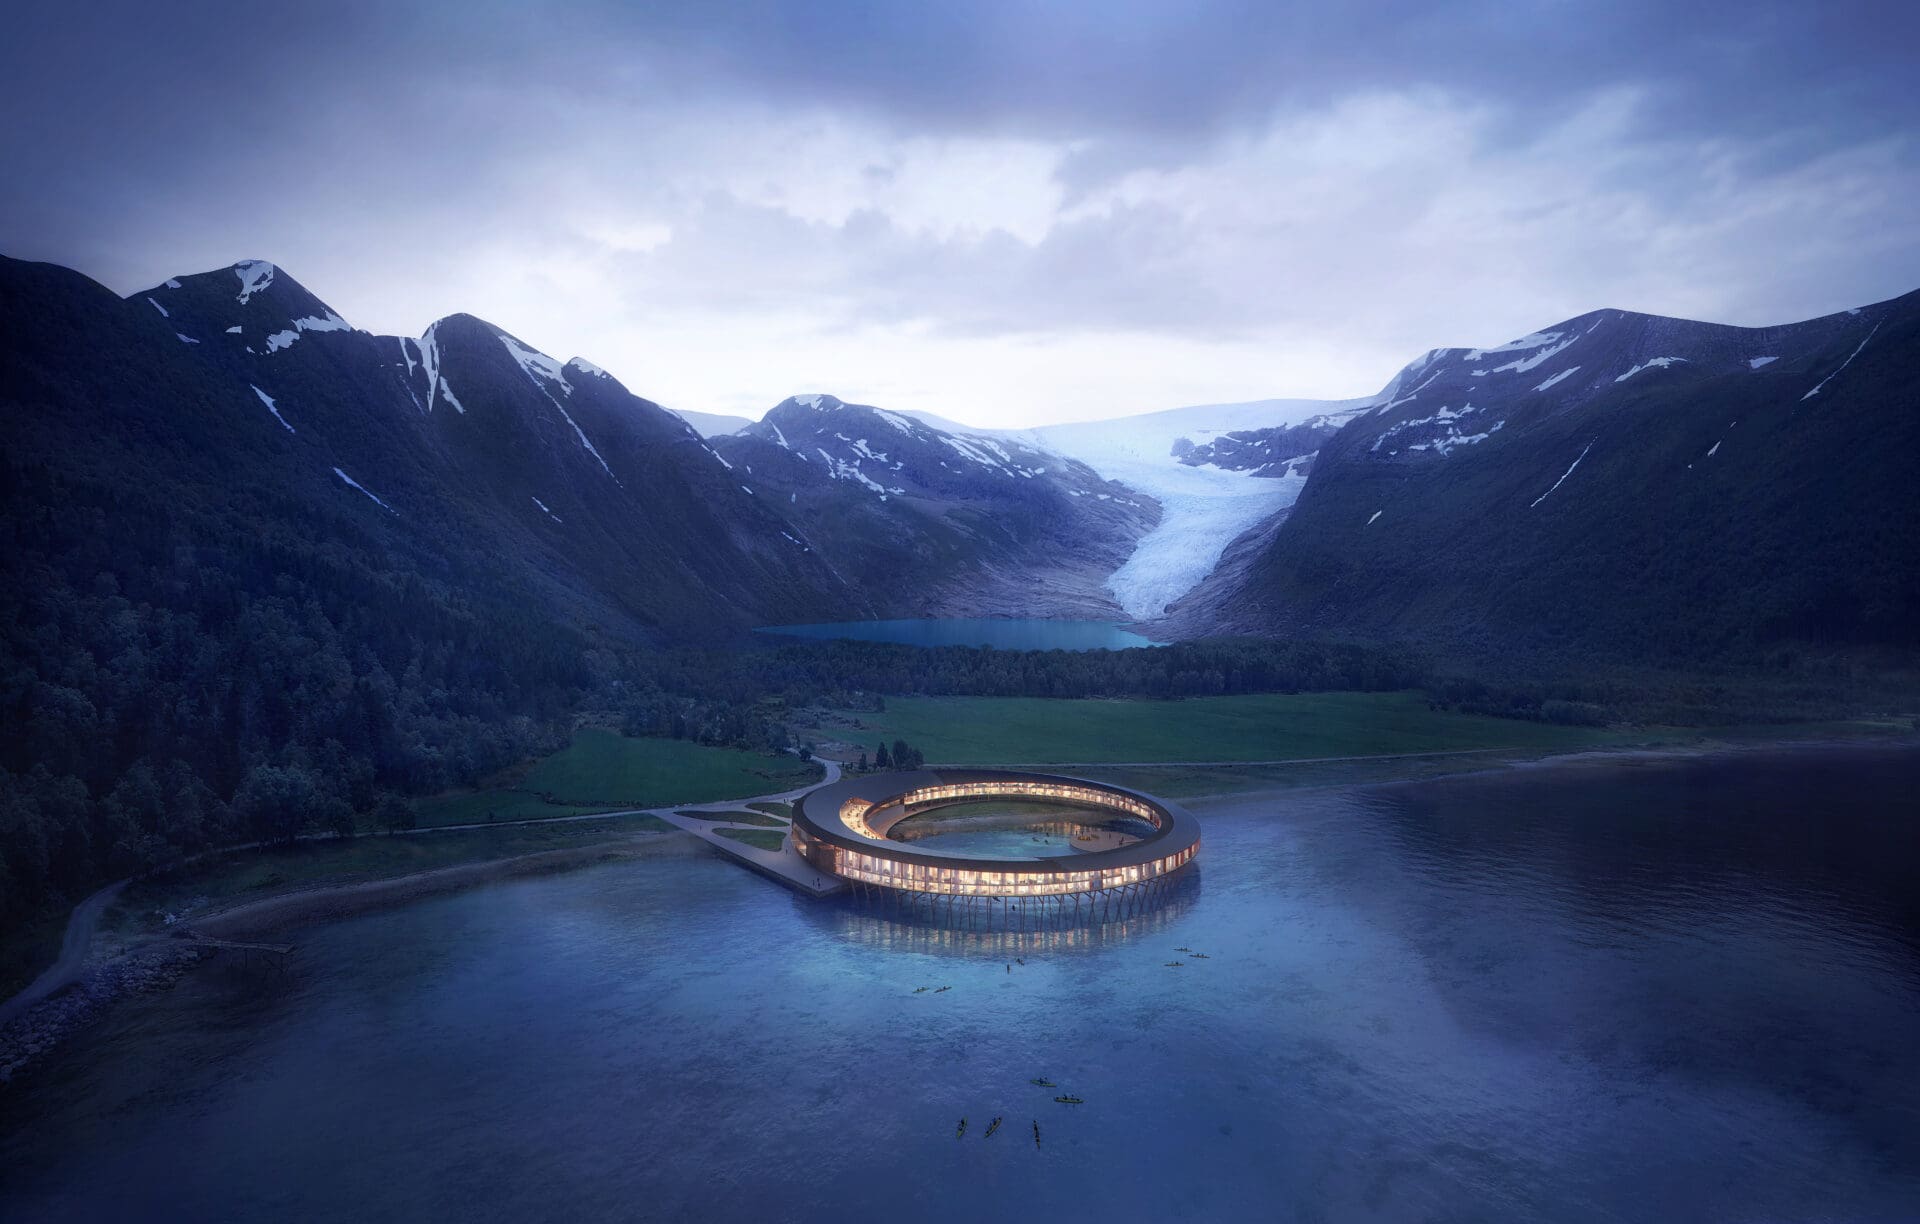 How can hotels be more sustainable? | Six Senses Svart Hotel above the Holandsfjorden fjord